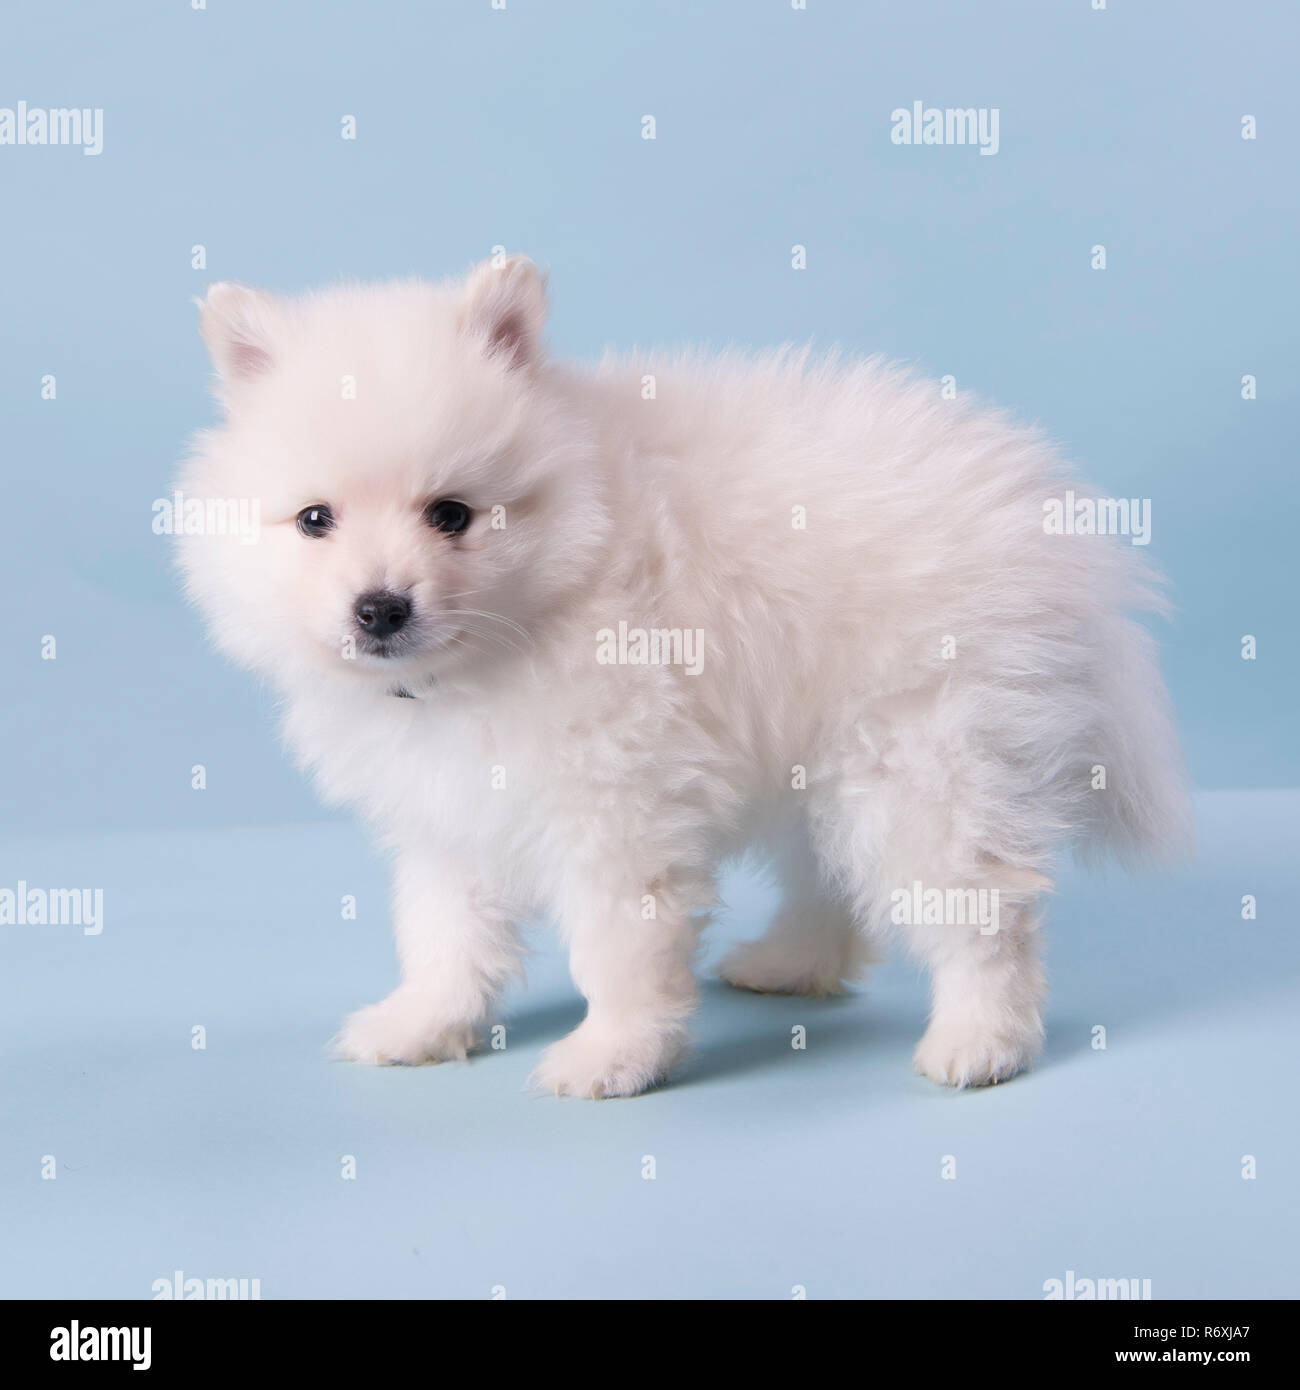 Pomeranian Puppy 6 weeks old cute photography Stock Photo